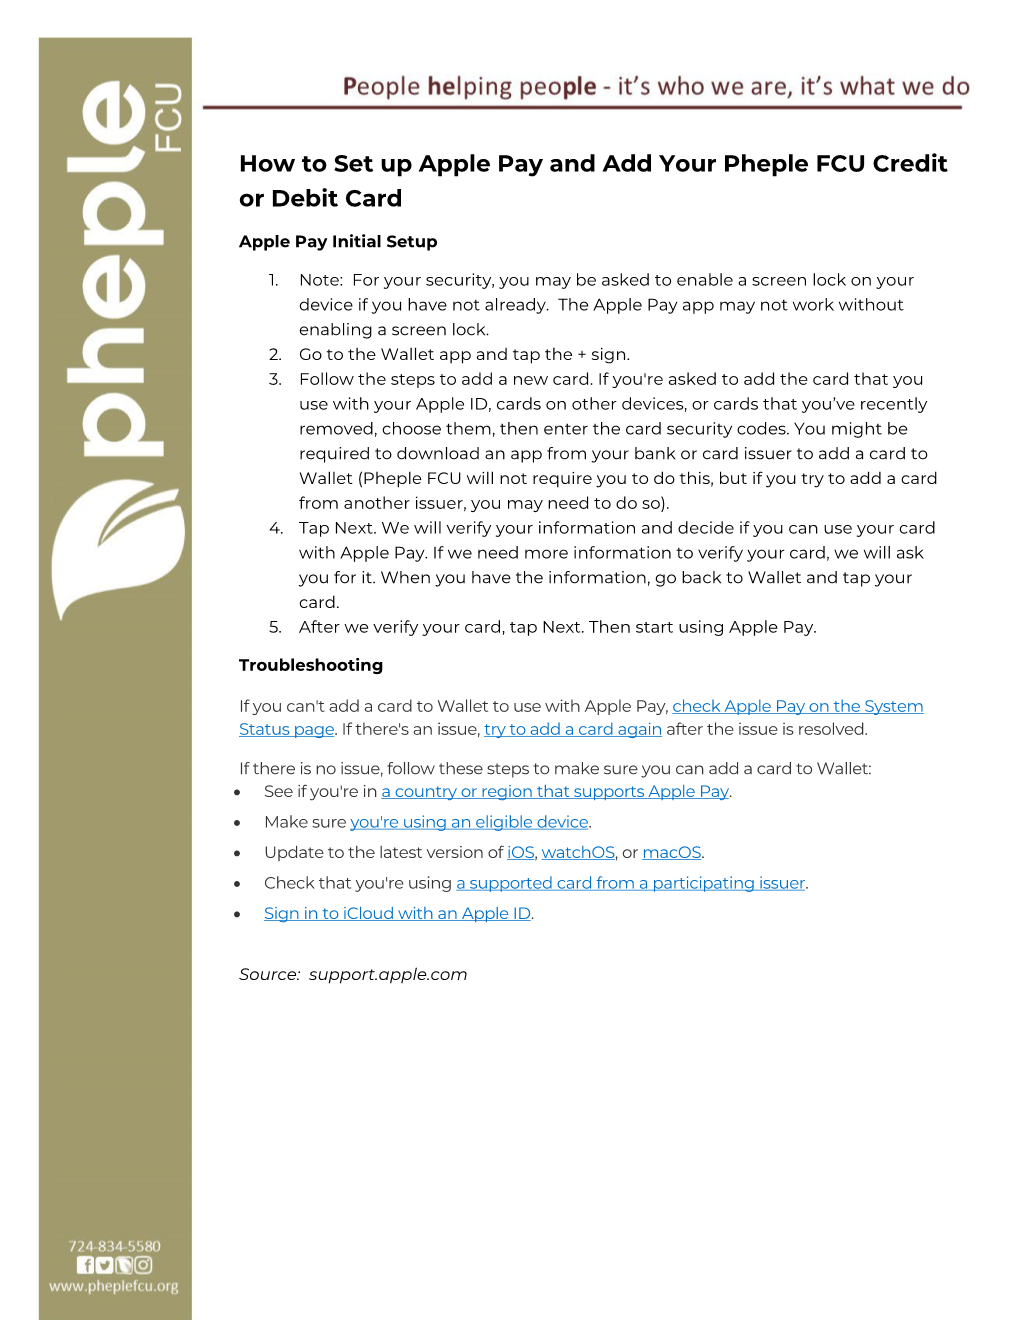 How to Set up Apple Pay and Add Your Pheple FCU Credit Or Debit Card